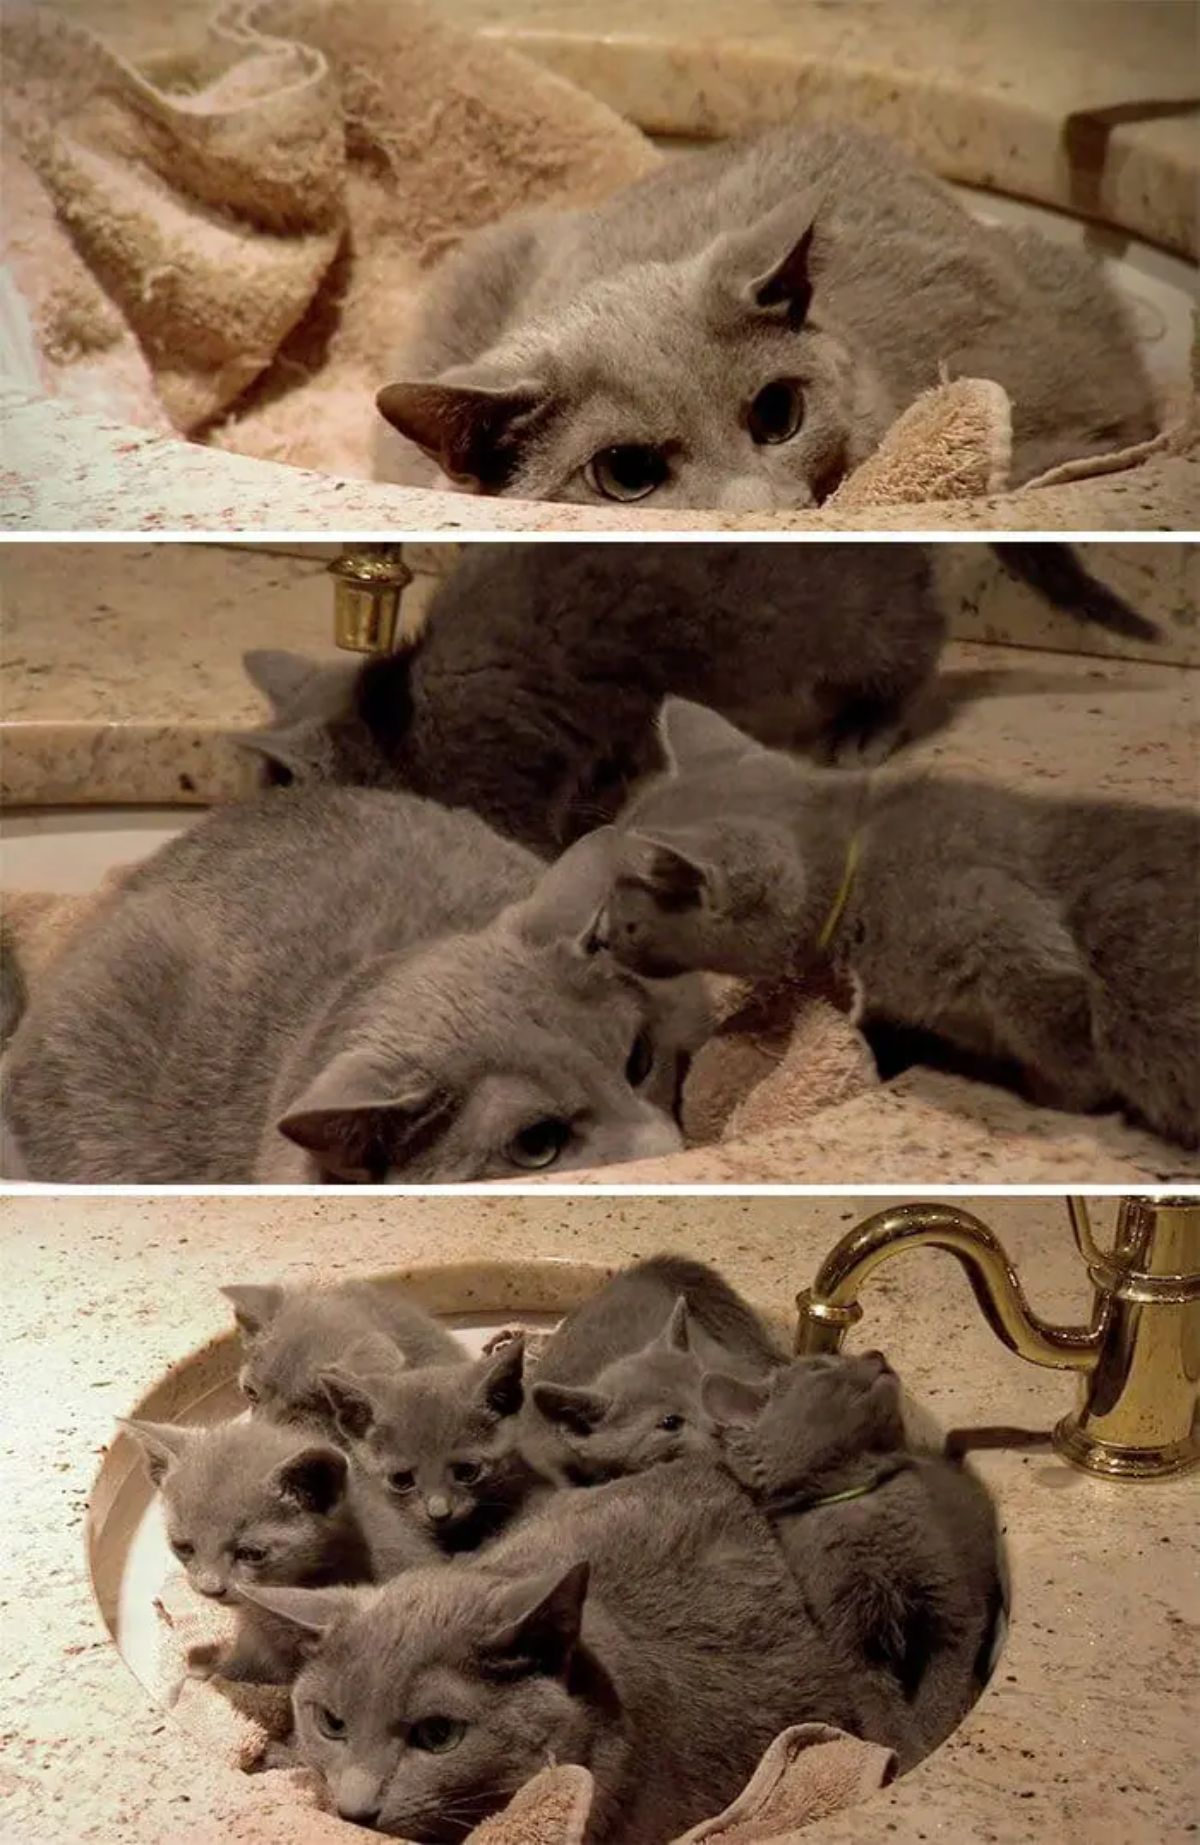 3 photos of a grey cat inside a wash basin and in the last 2 photos grey kittens are joining the cat